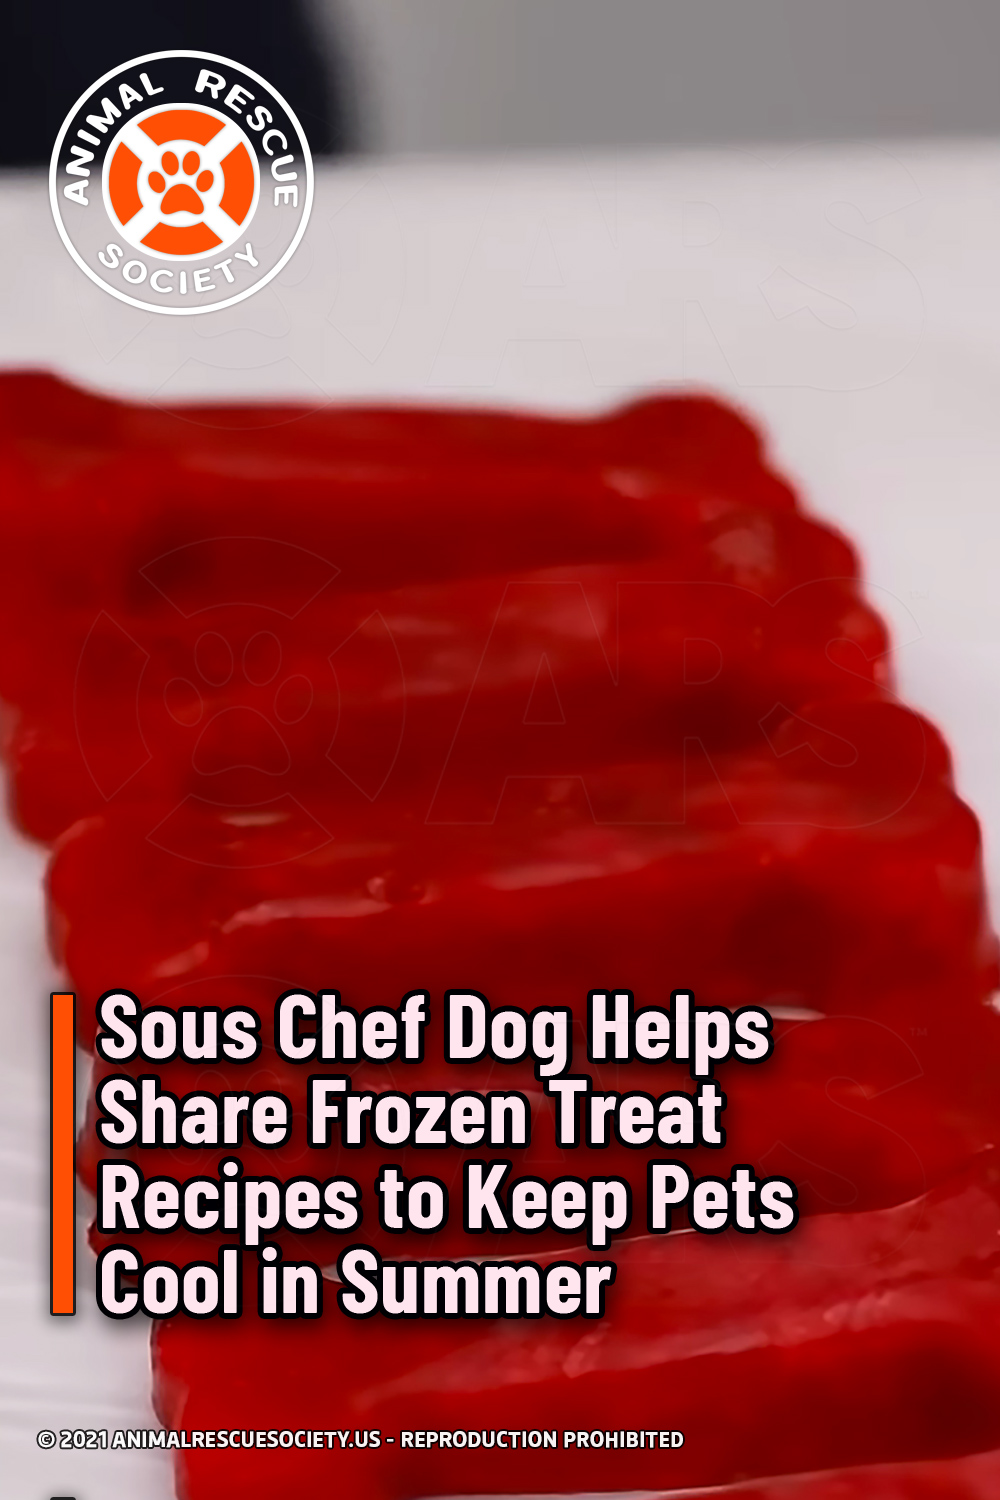 Sous Chef Dog Helps Share Frozen Treat Recipes to Keep Pets Cool in Summer